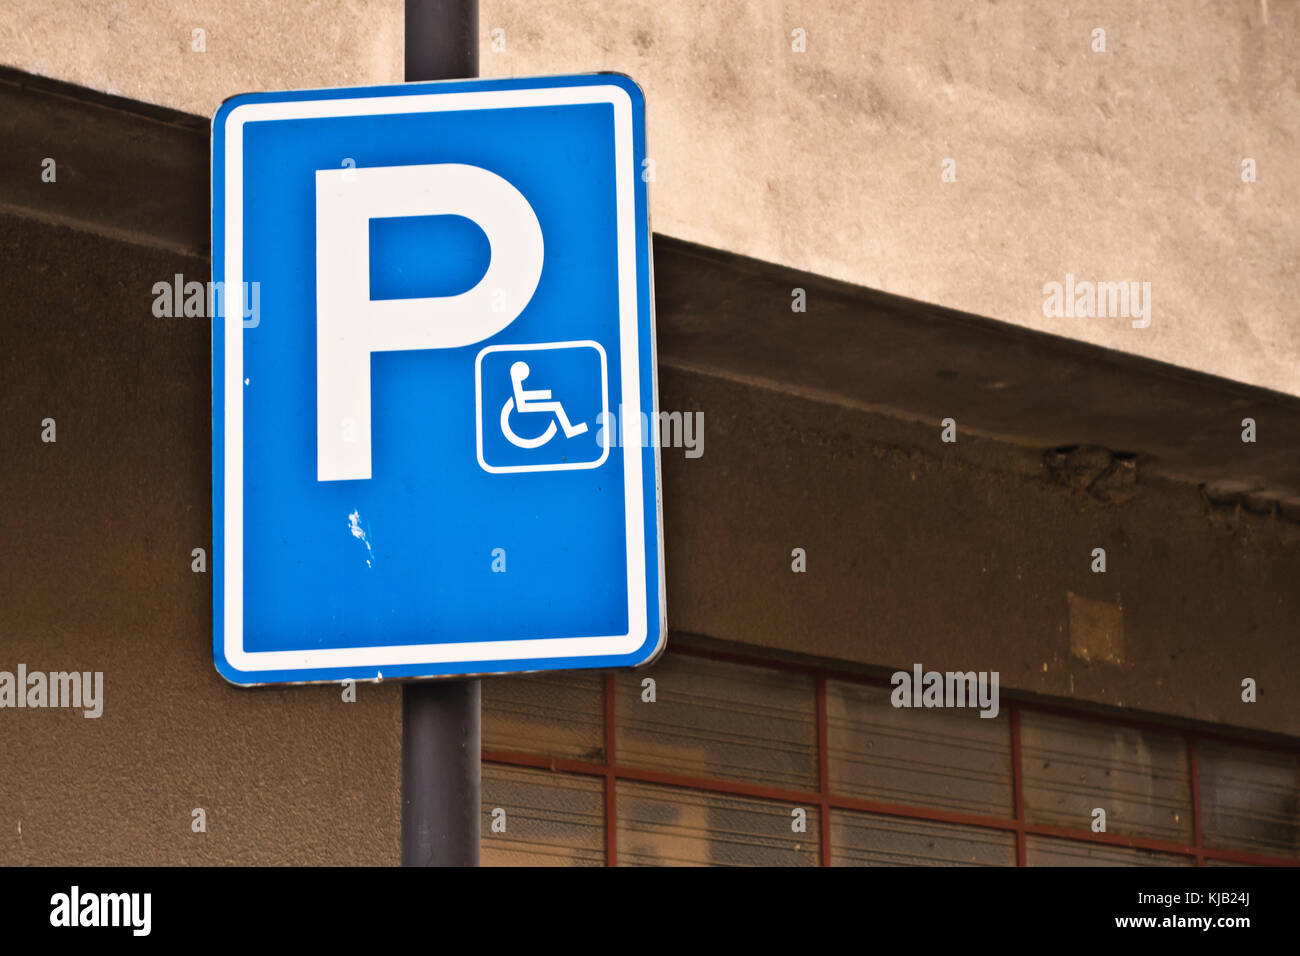 disabled parking sign Stock Photo